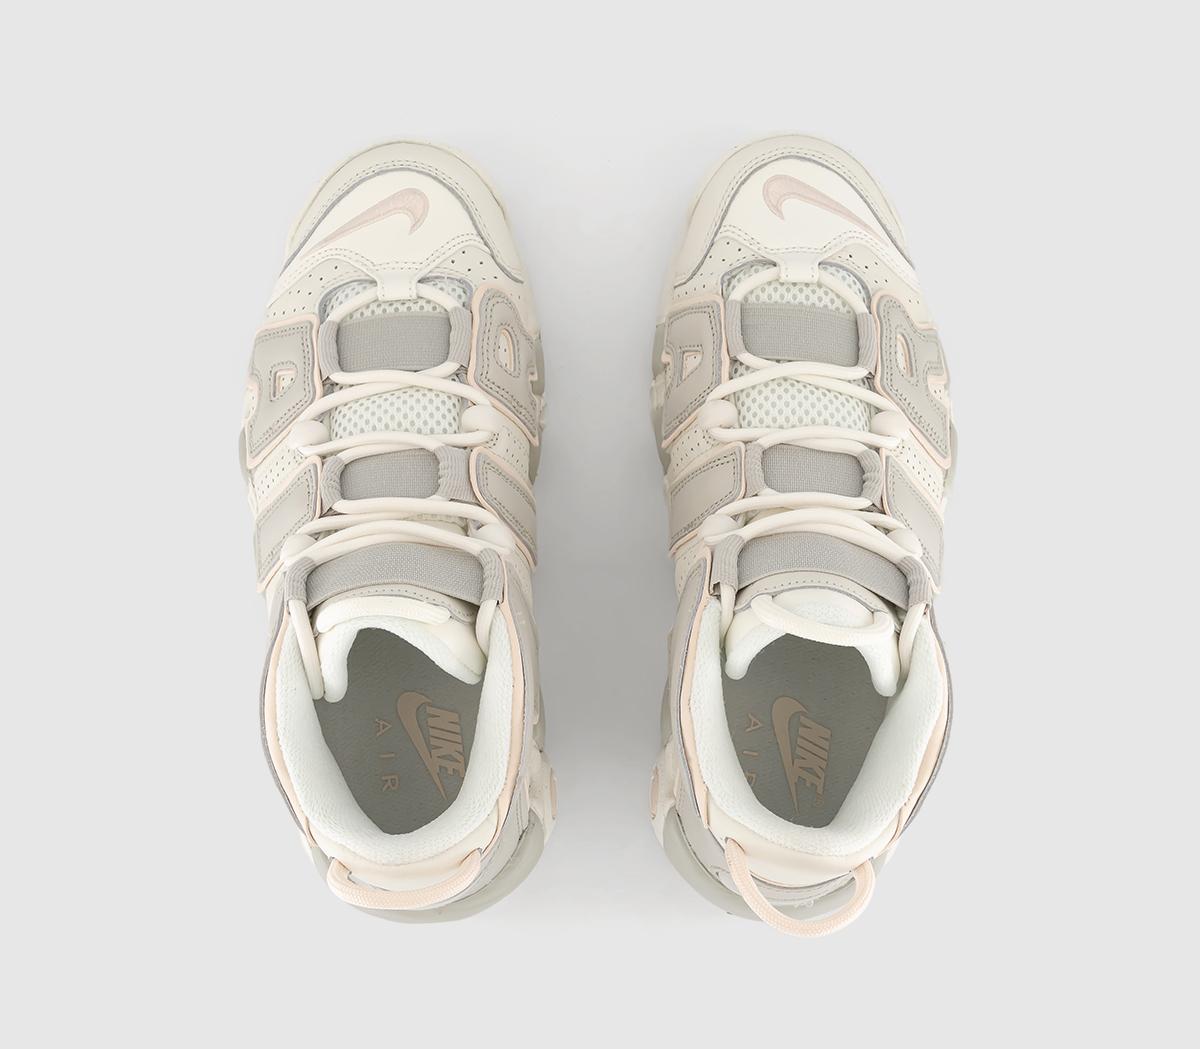 Nike Air More Uptempo Trainers Sail Guava Ice Light Bone - Women's Trainers